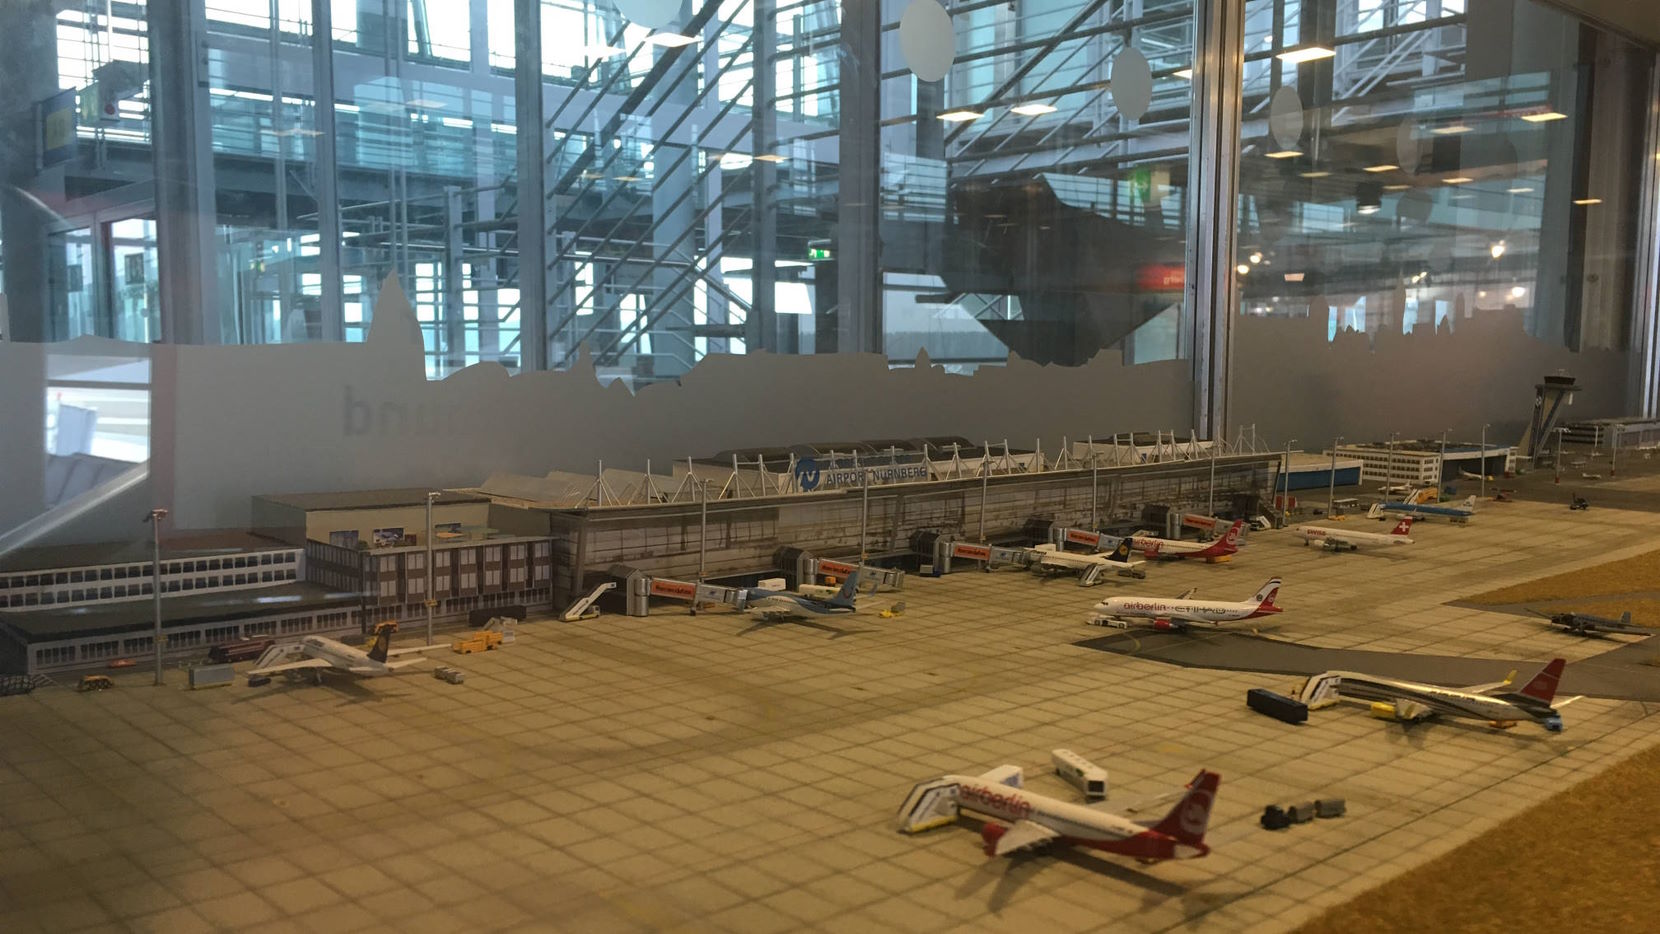 A scale model of NUE in the terminal of NUE.